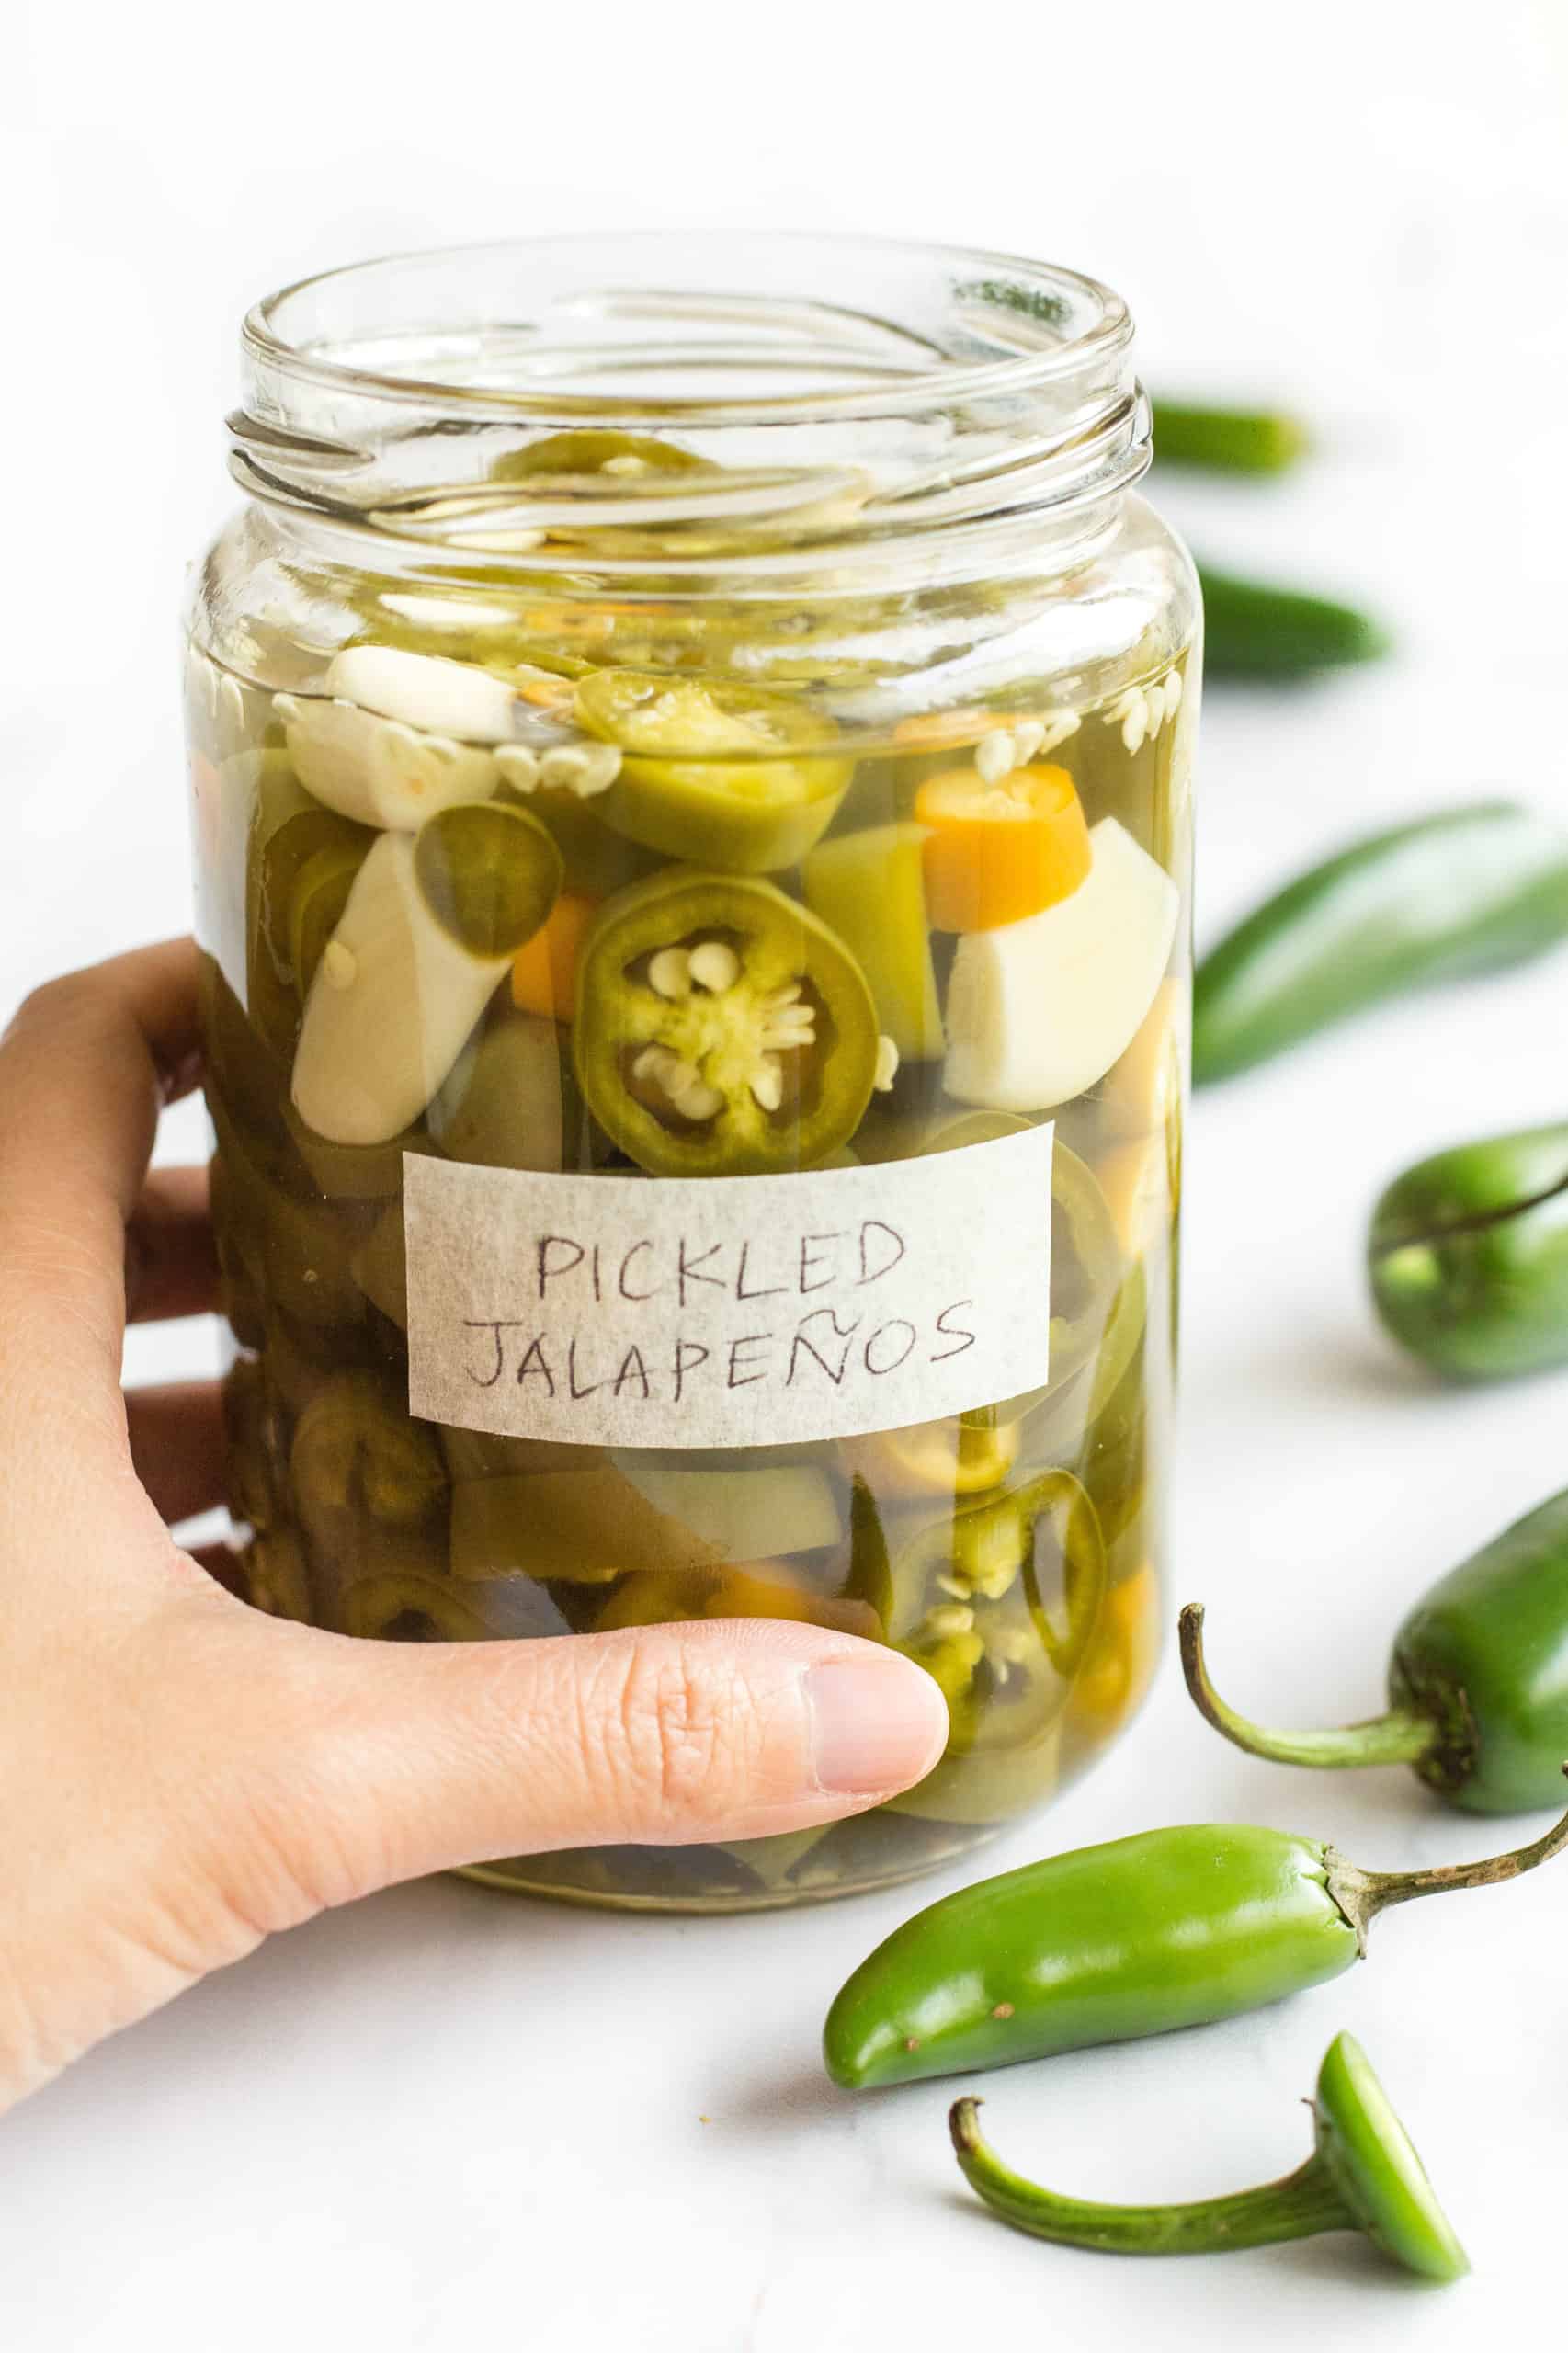 Hand holding a jar of freshly pickled jalapeño peppers.